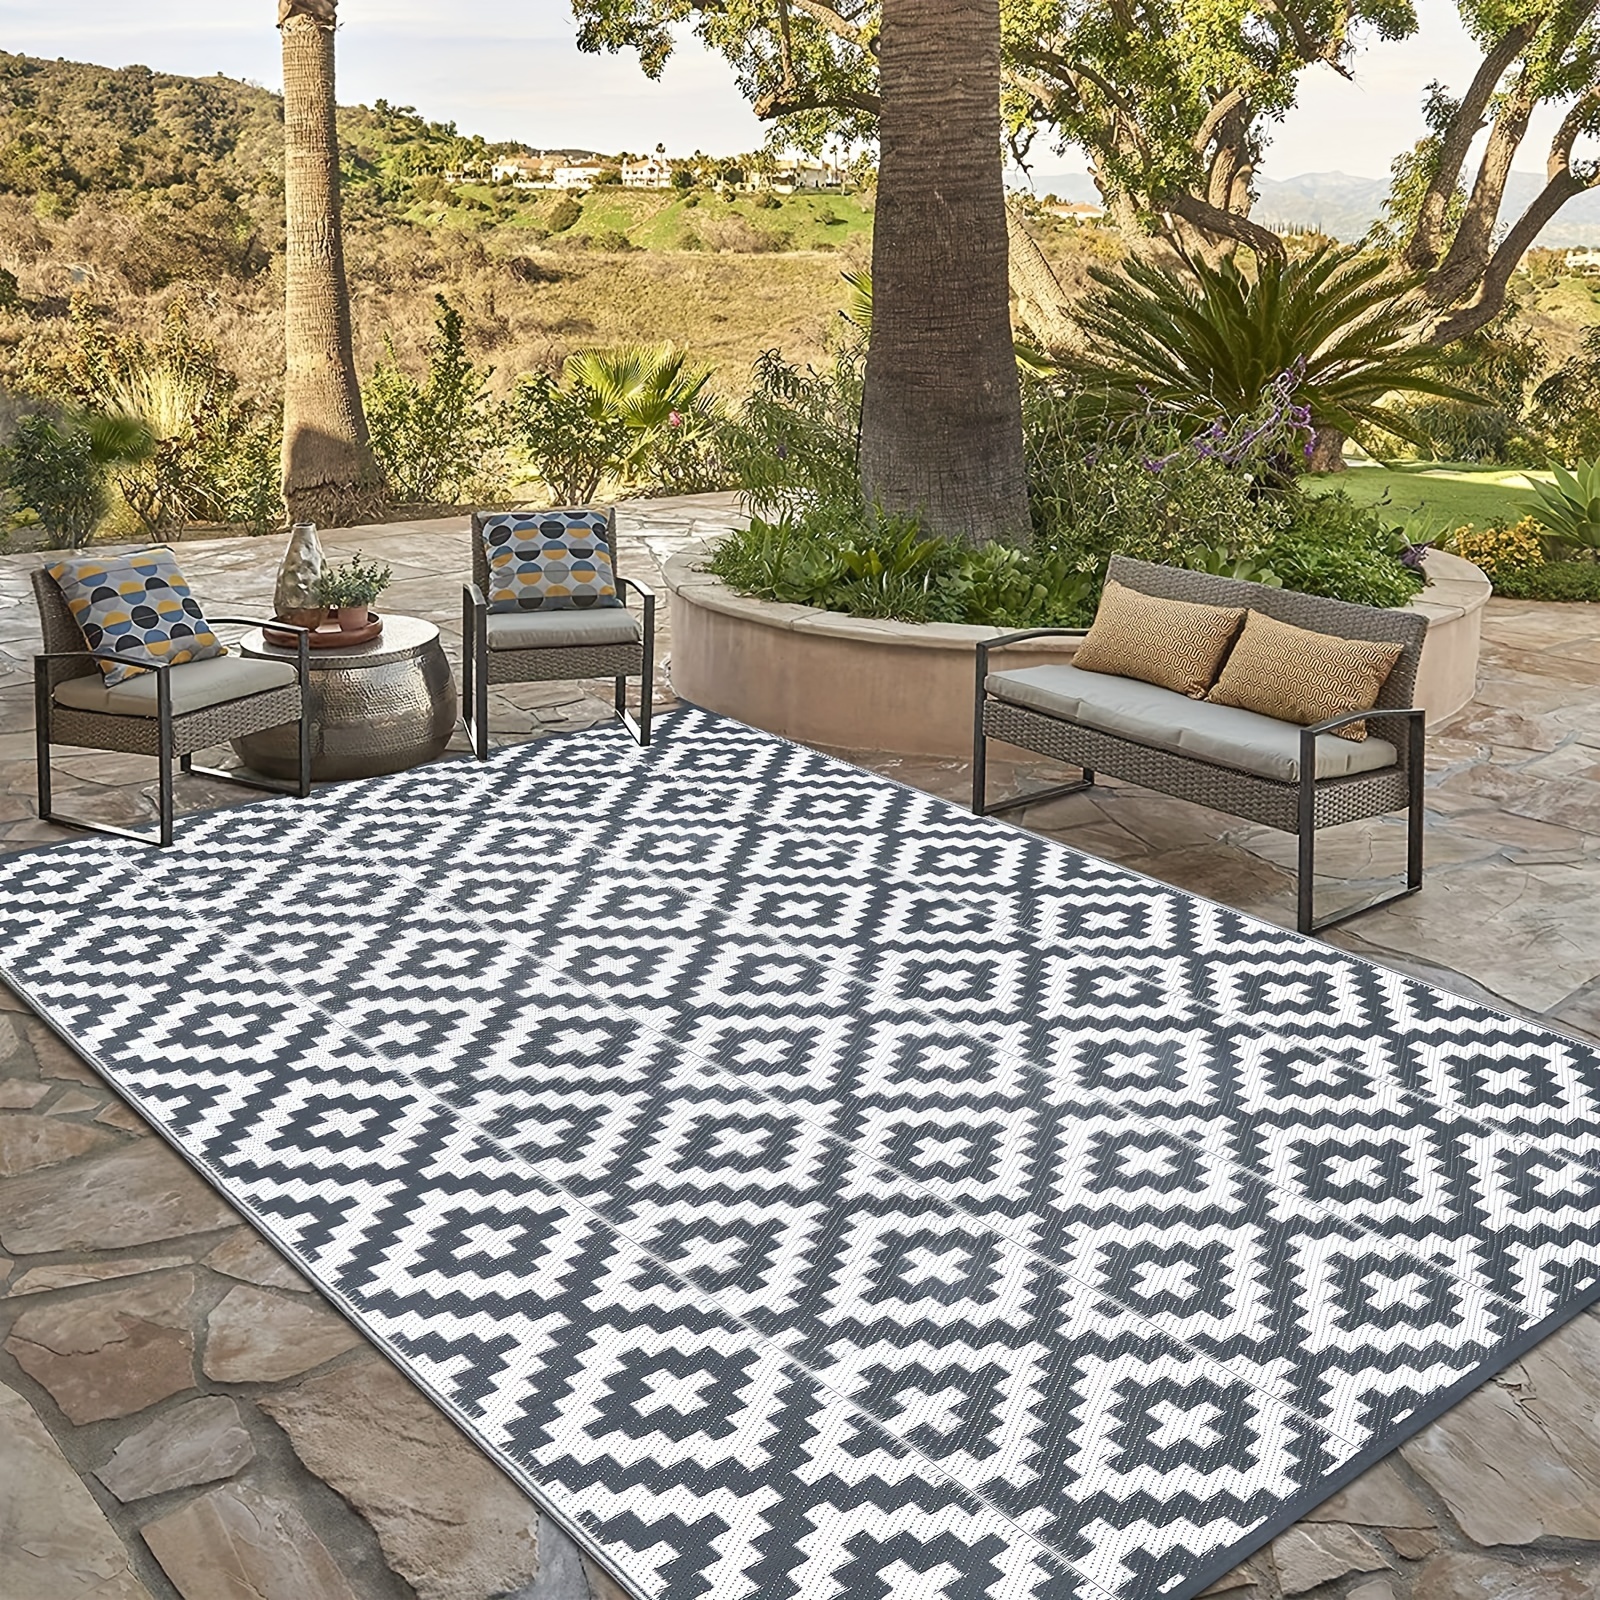 

Reversible Mat, Diamond Fade Resistant Plastic Straw Rug, Indoor Outdoor Plastic Patio Rug, Lightweight Stain Proof Carpet For Patio, Rv, Camping, Beach, Deck, Backyard And Picnic